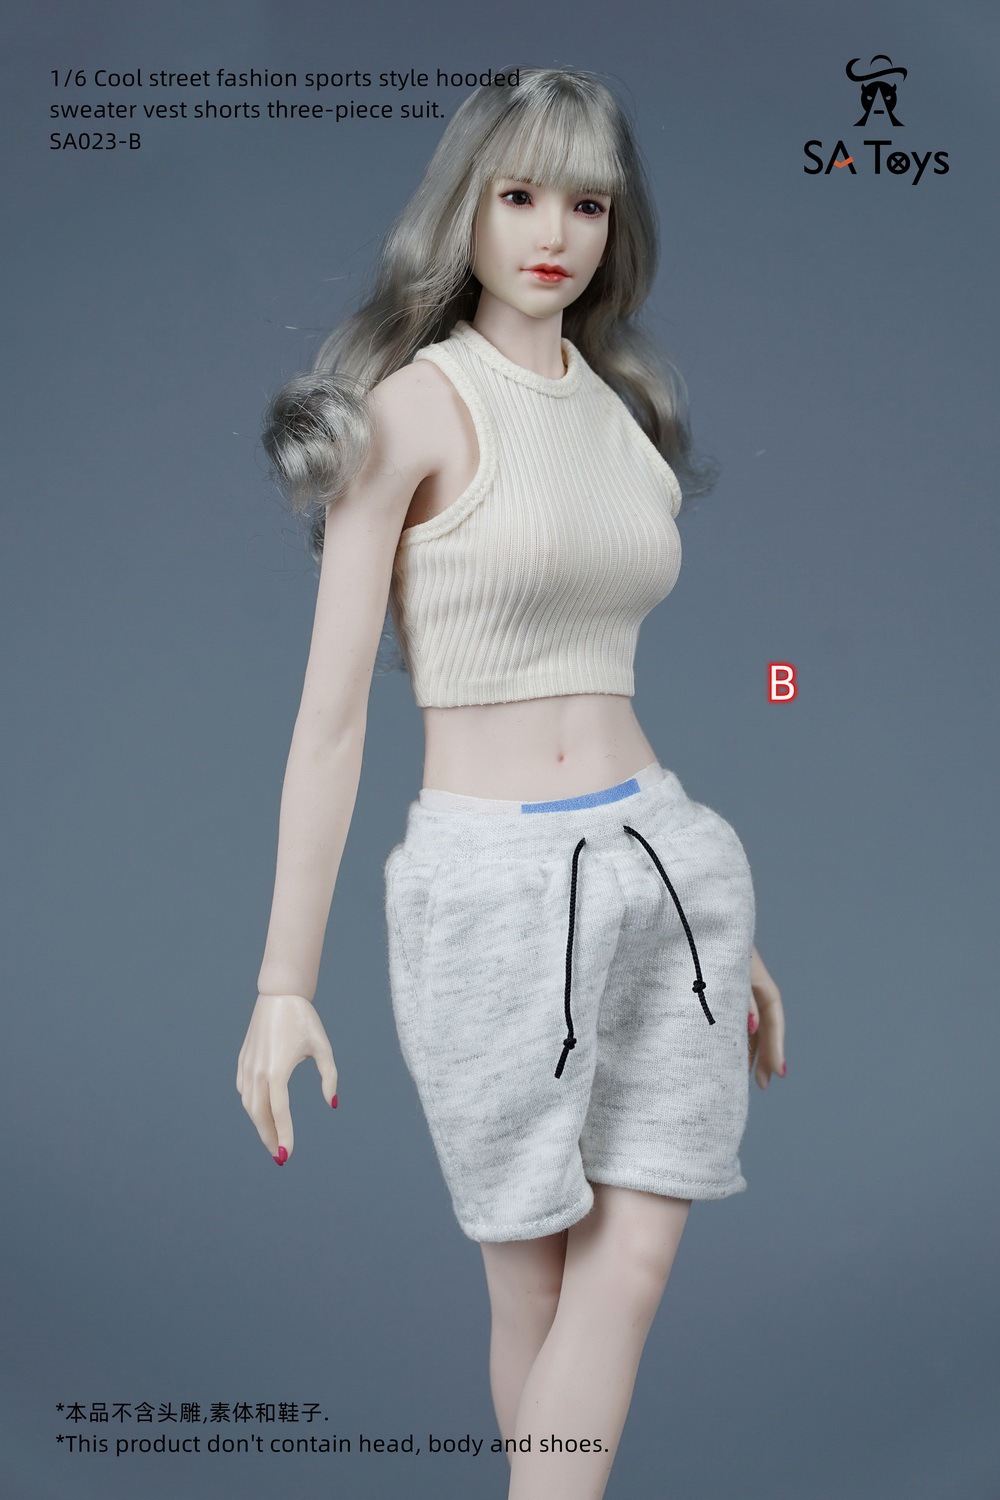 hipskirt - NEW PRODUCT: SA Toys: 1/6 hip skirt / floral elastic skirt / fashionable sports style hooded sweater cover, hip-hop fisherman hat halter and footwear casual pants [variety optional] 17020112